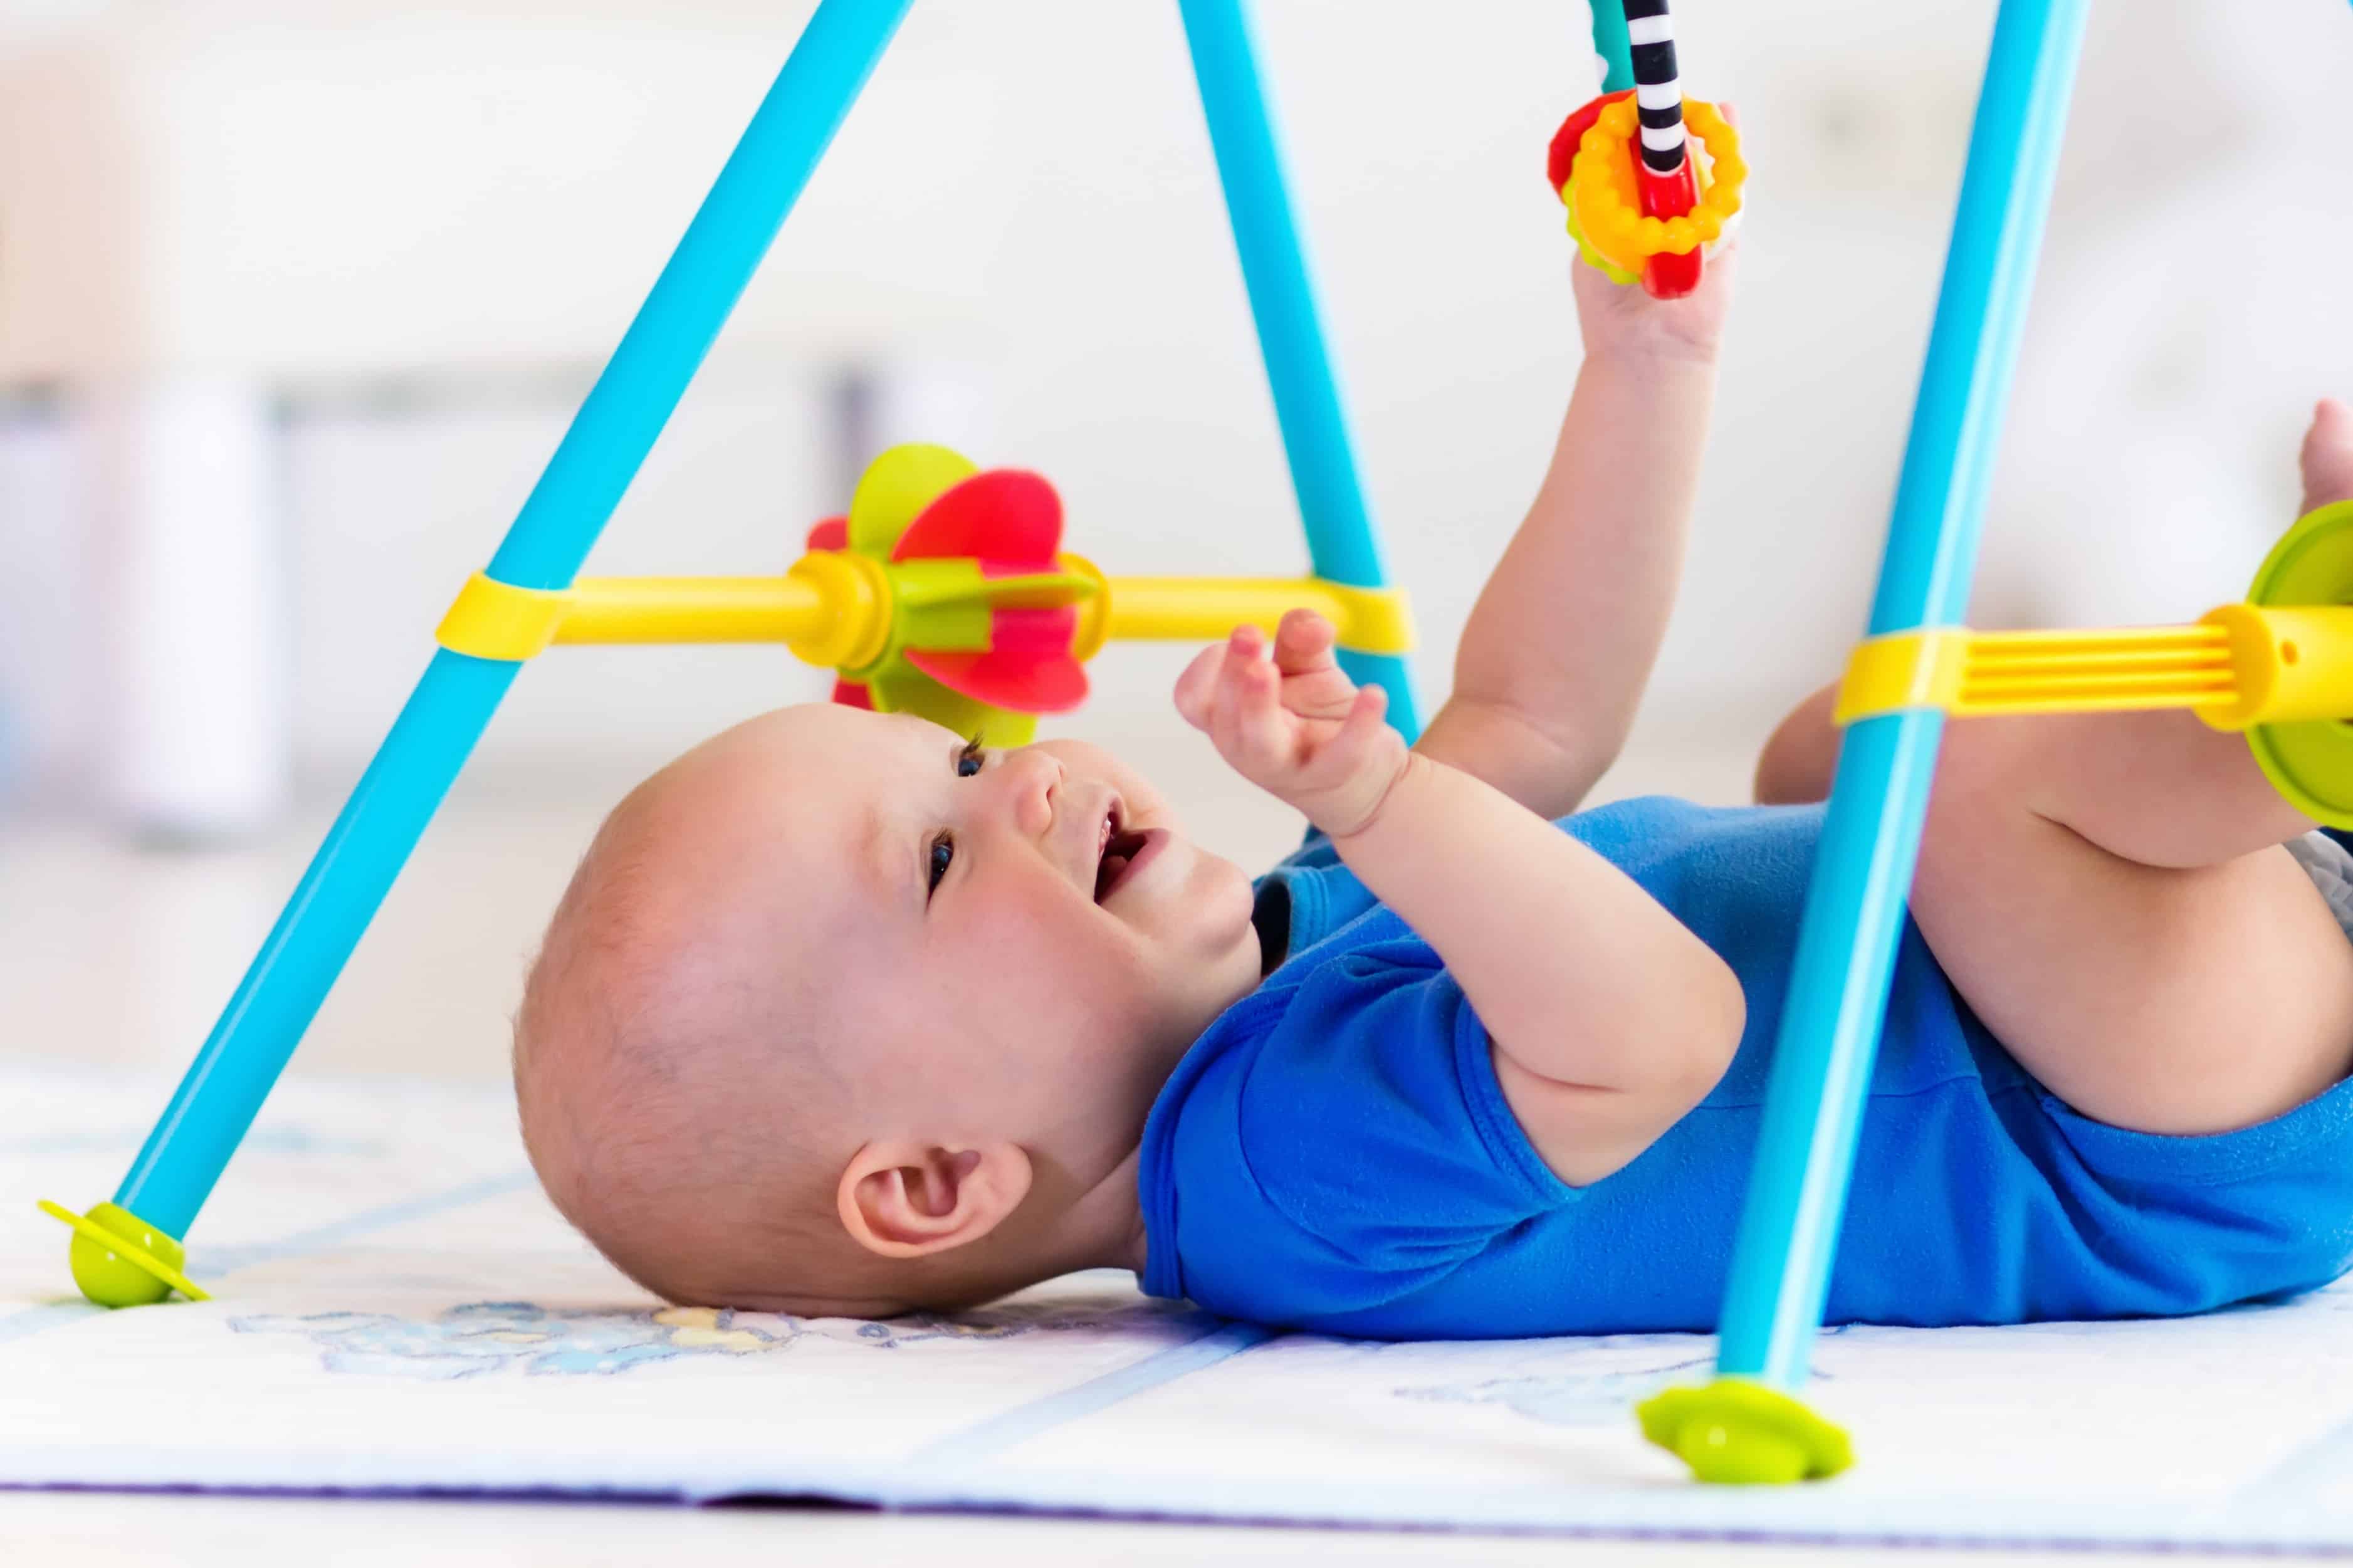 best fine motor toys for toddlers